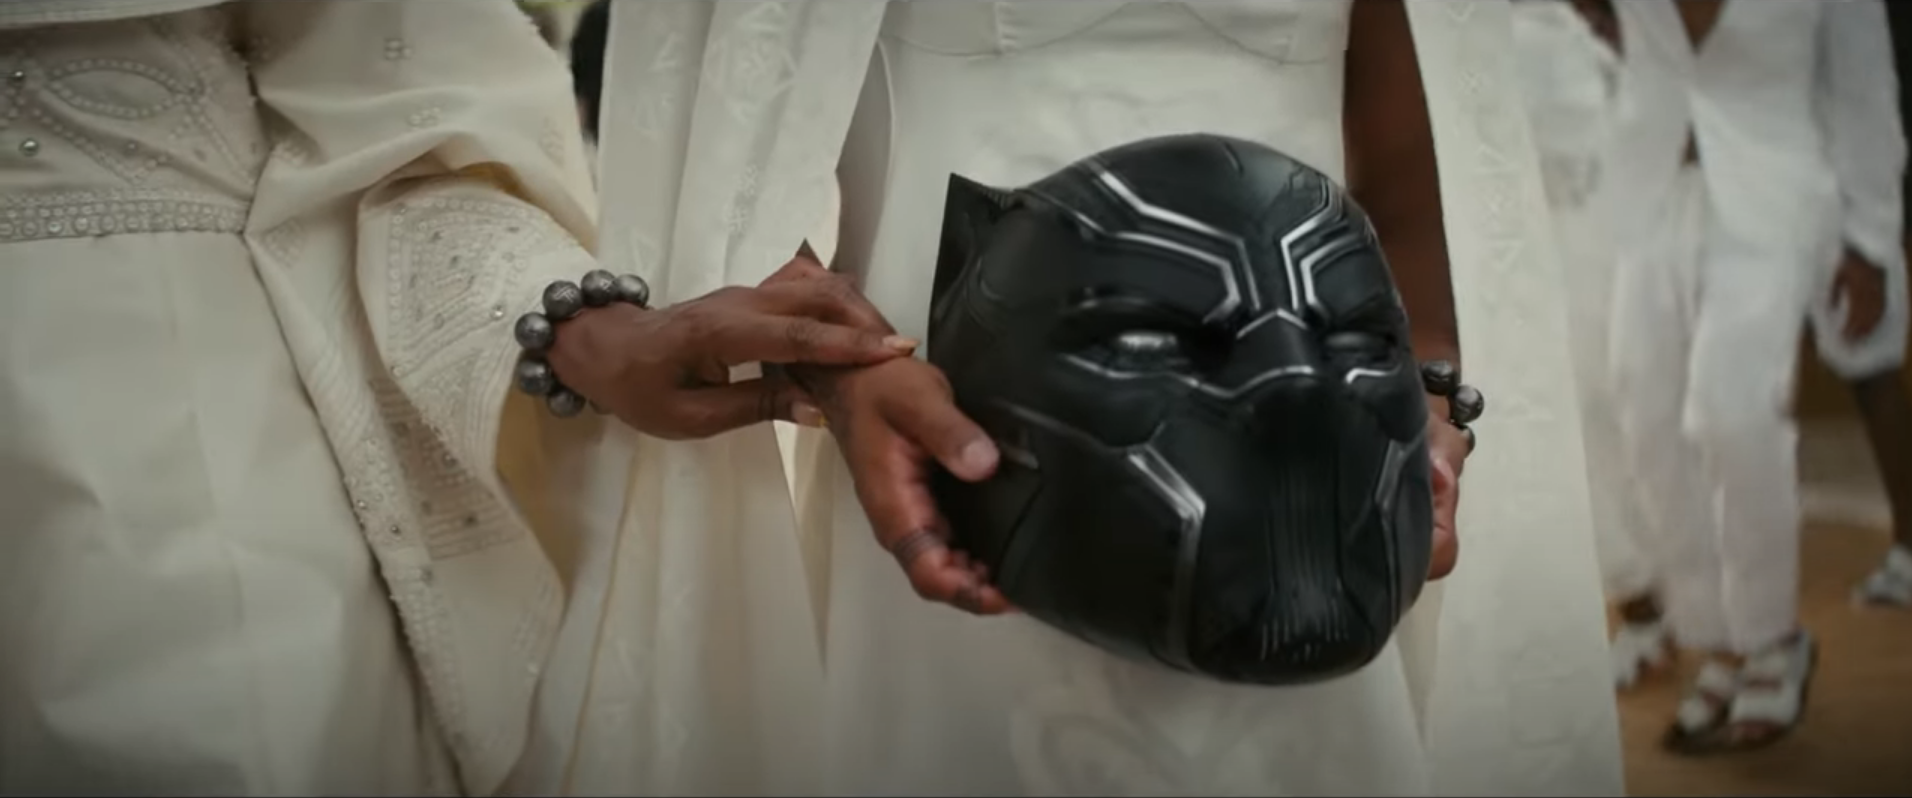 New "Black Panther 2" movie trailer features a female protagonist